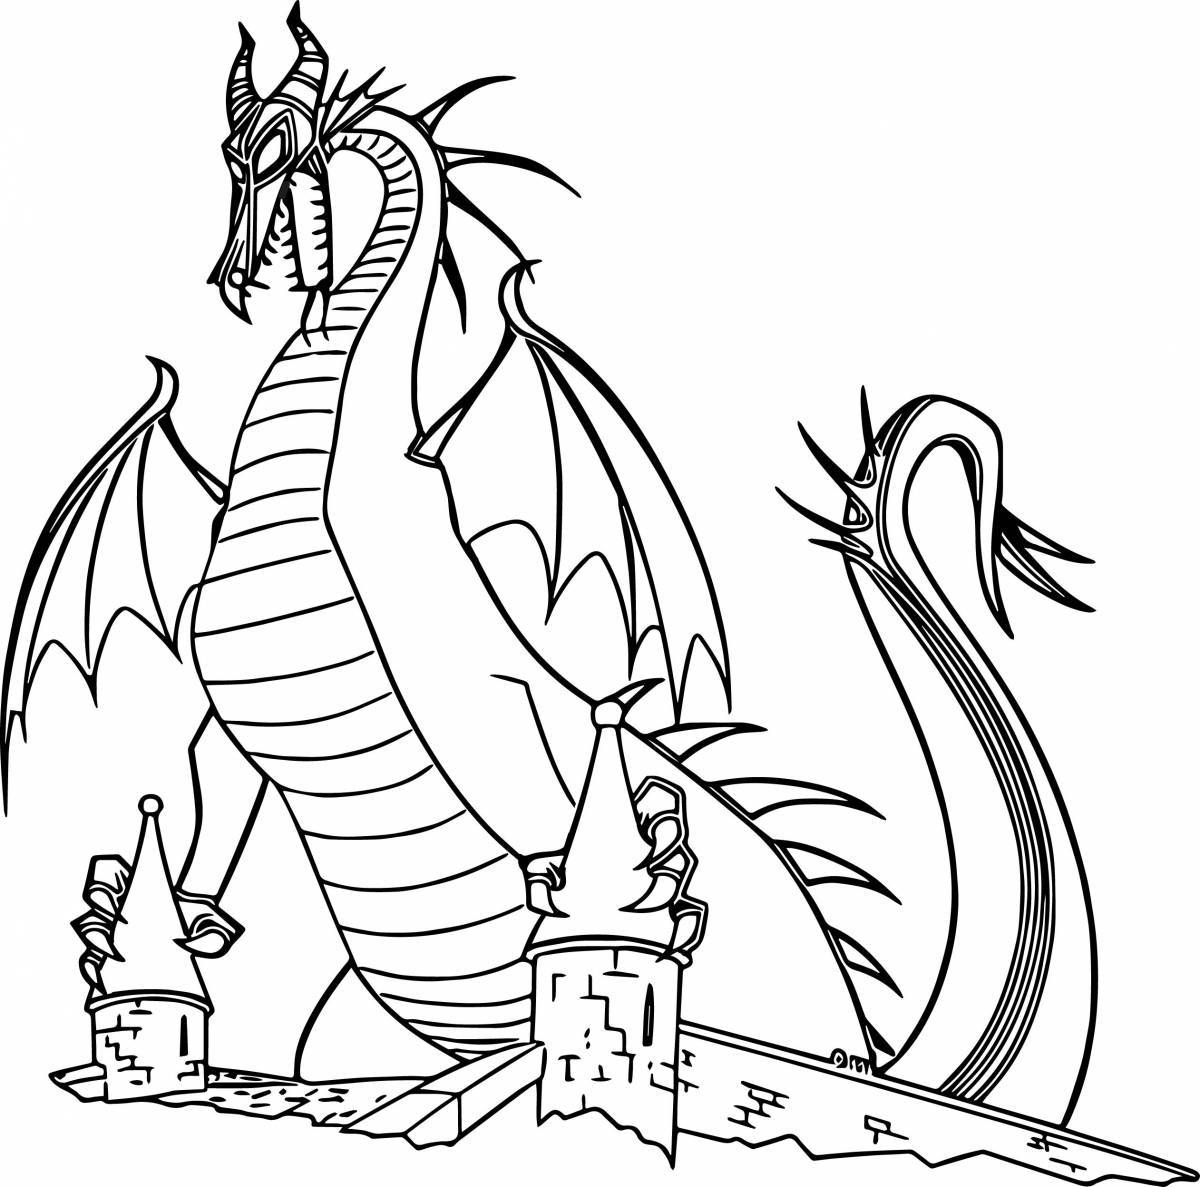 Playful dragon coloring book for kids